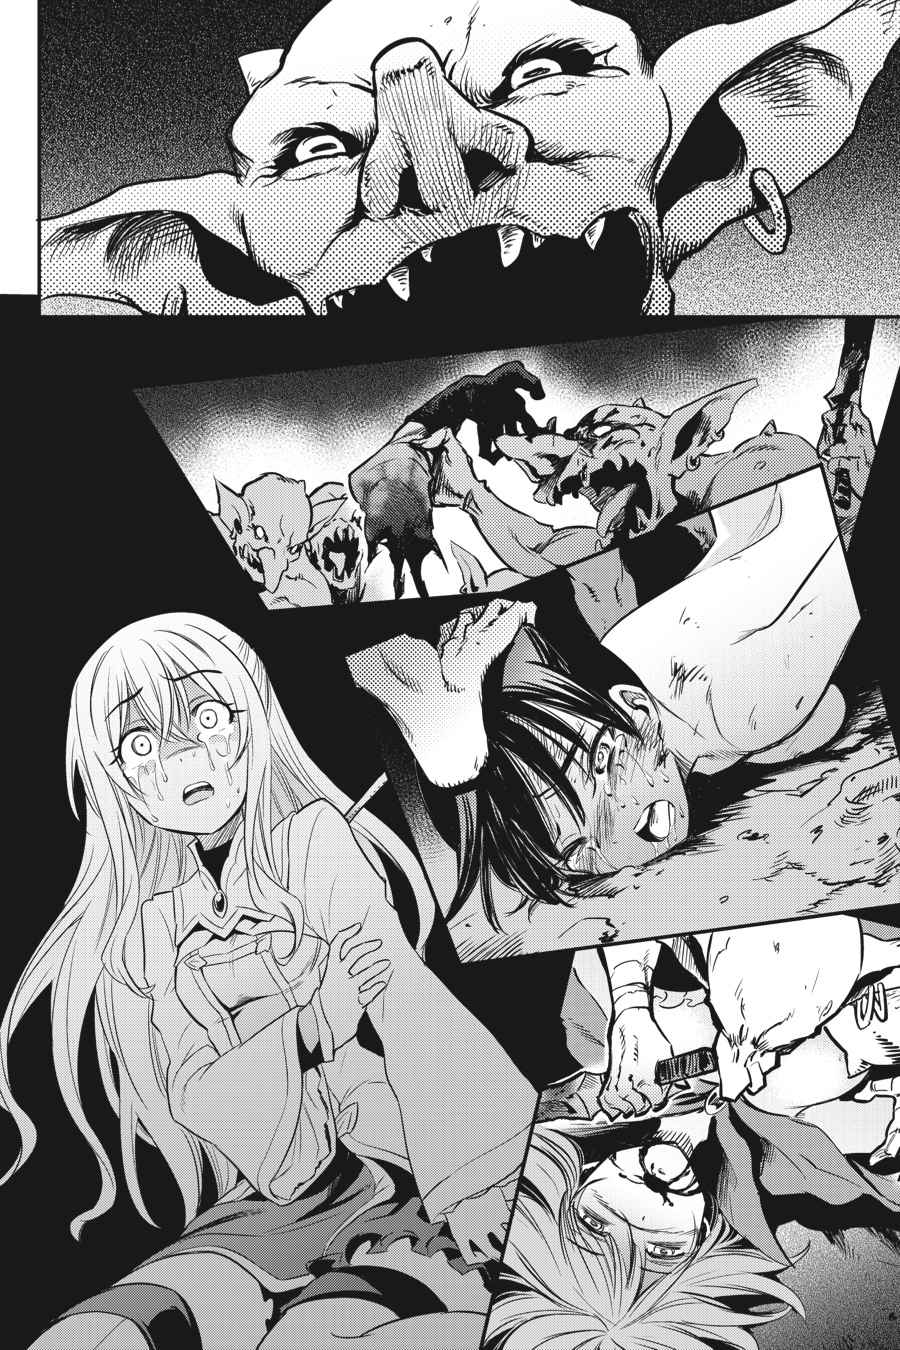 When the manga got so much rape and gore you stop caring : r/GoblinSlayer